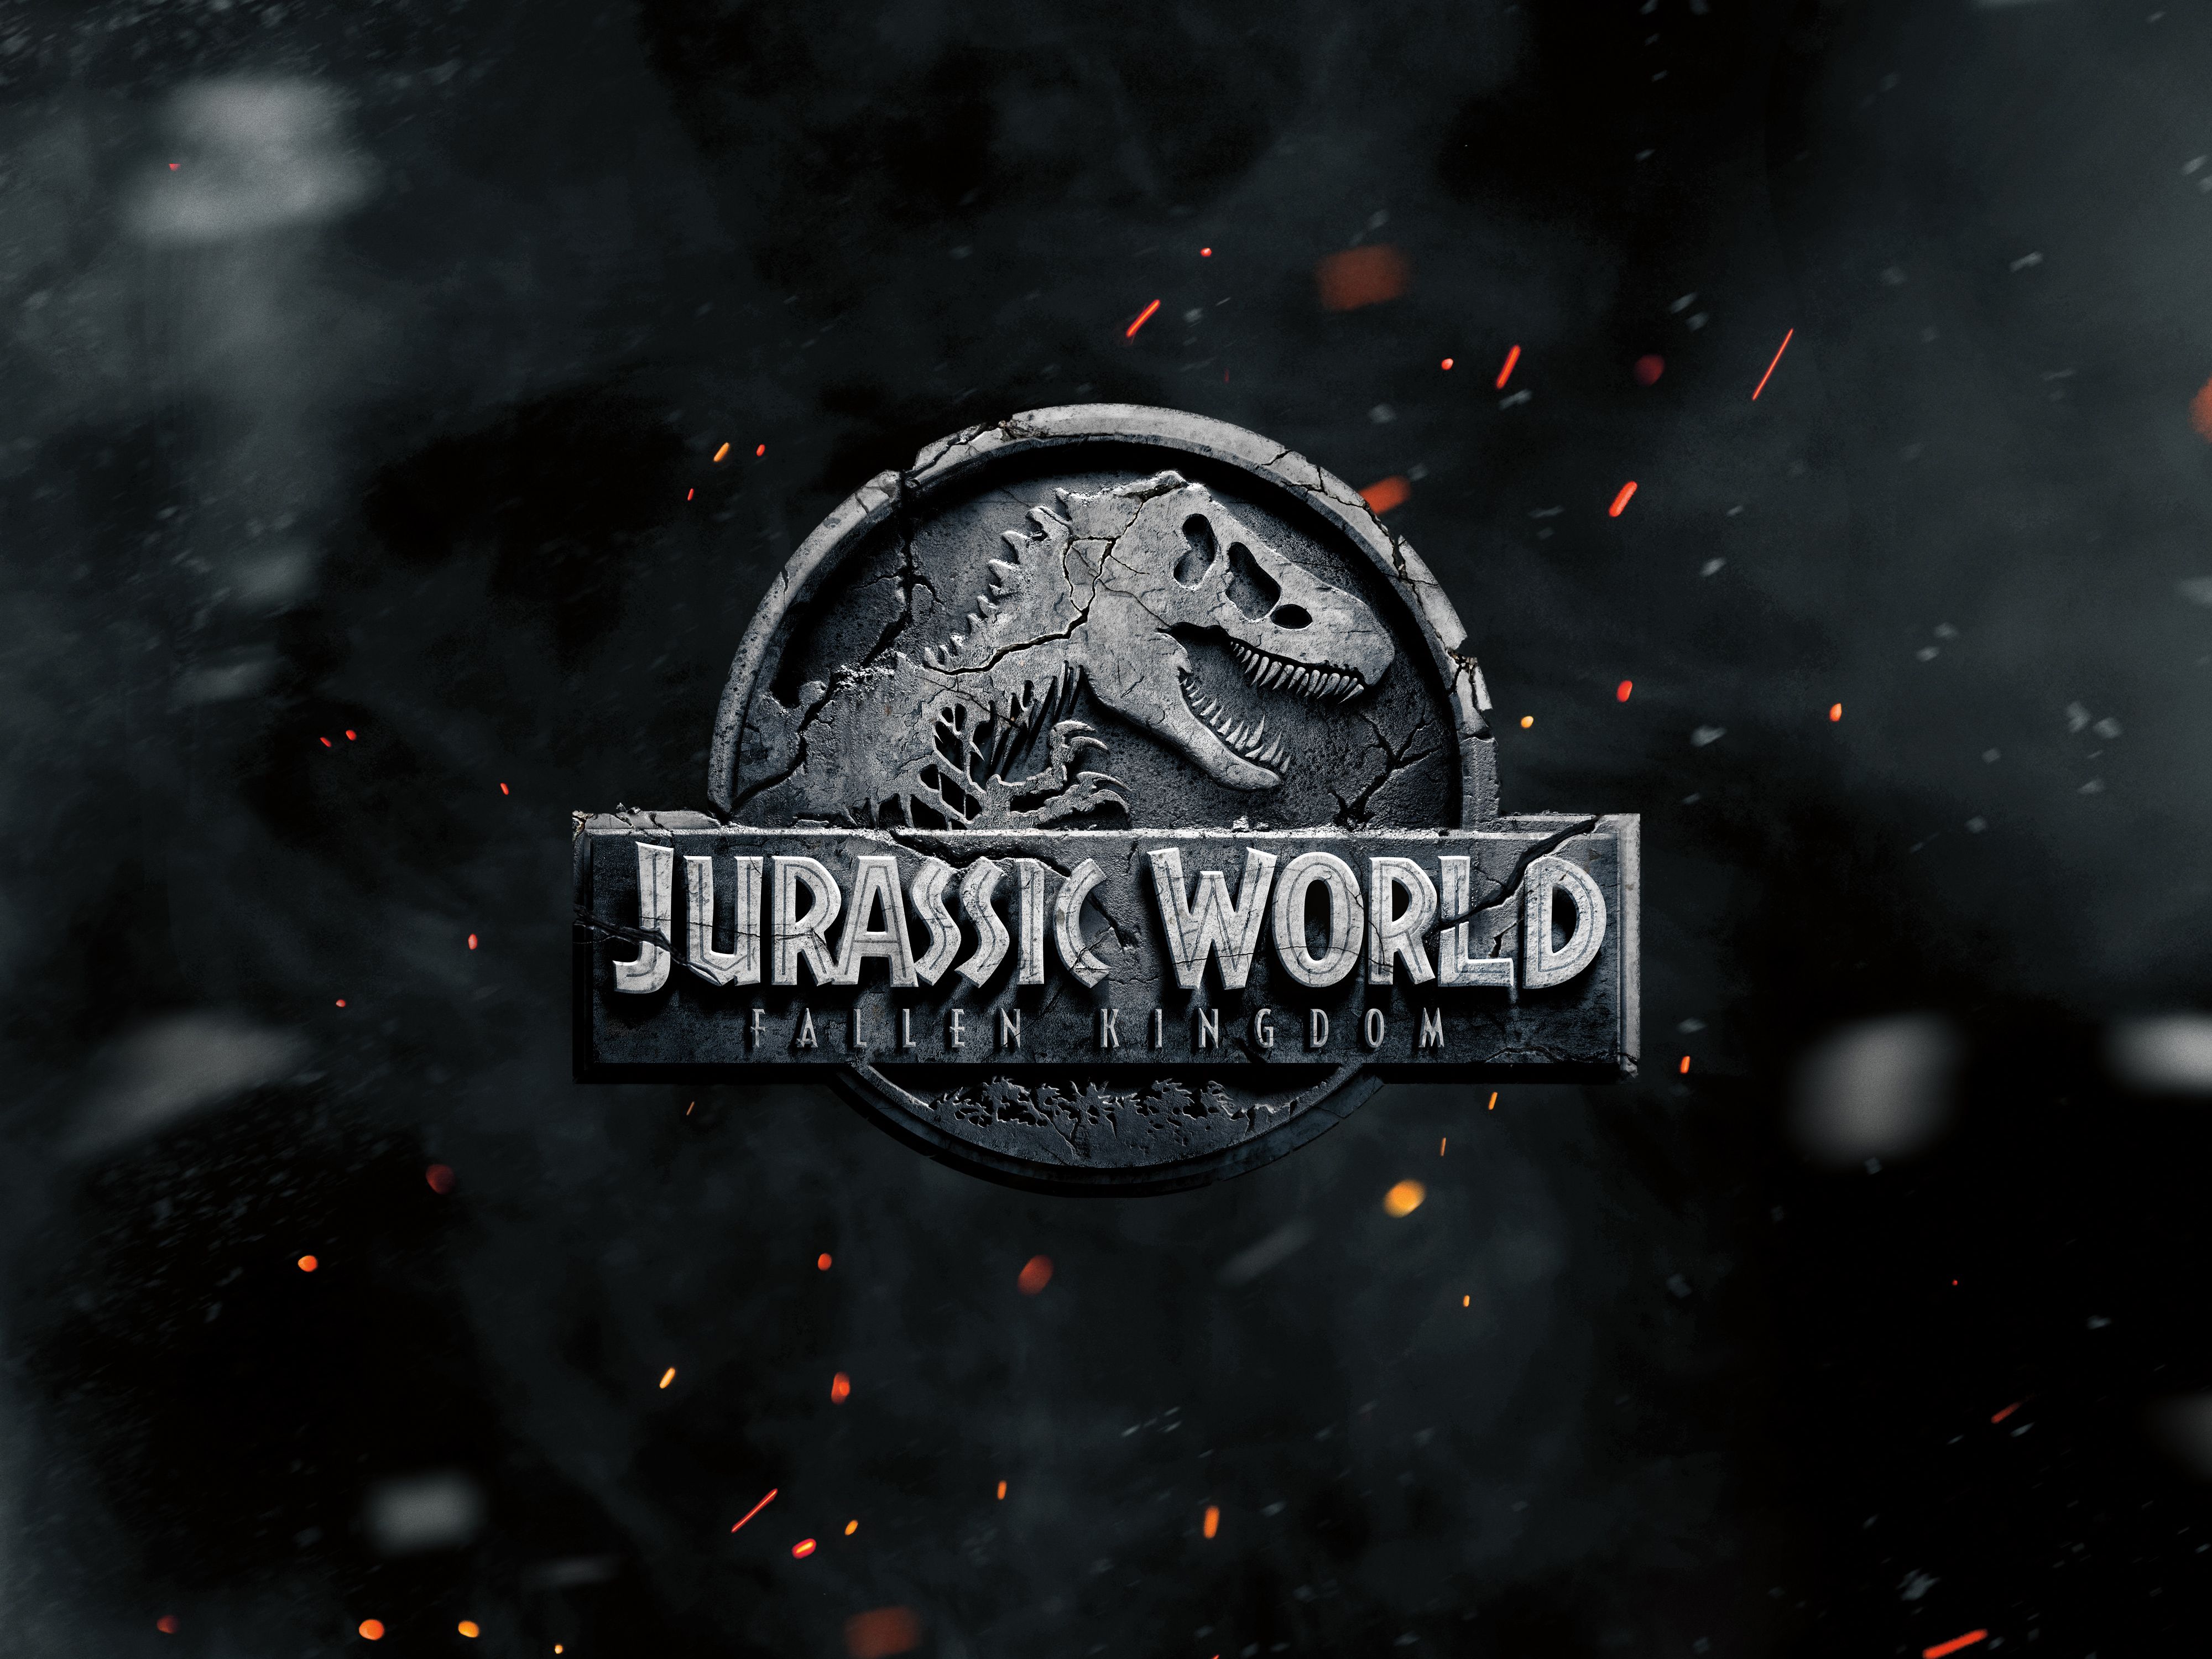 Free download Jurassic Park 3 Sunset logo Wallpaper by kongzilla978 on  1280x720 for your Desktop Mobile  Tablet  Explore 27 Jurassic Park  Logo Wallpapers  Jurassic Park Background Jurassic Park Wallpapers Jurassic  Park 3 Wallpaper